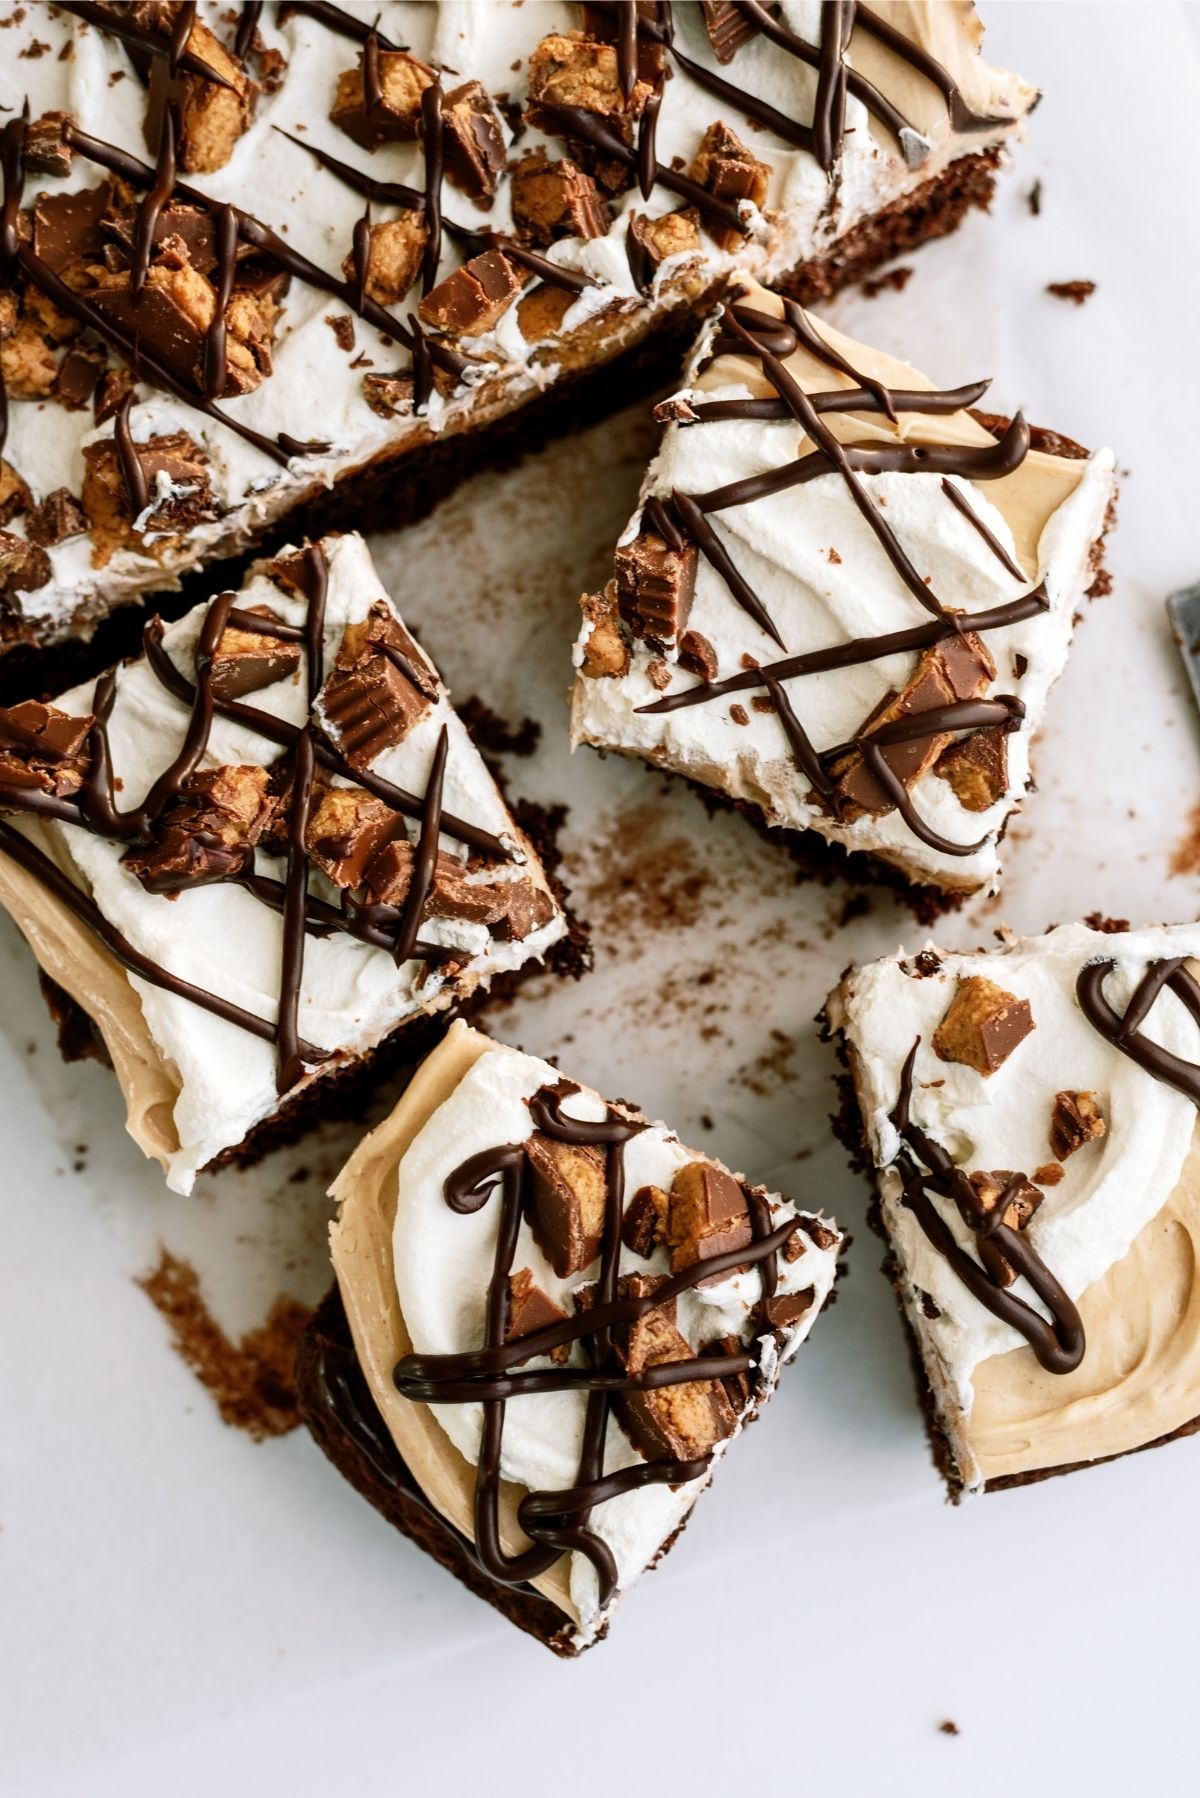 Reese’s Peanut Butter Poke Cake cut into squares